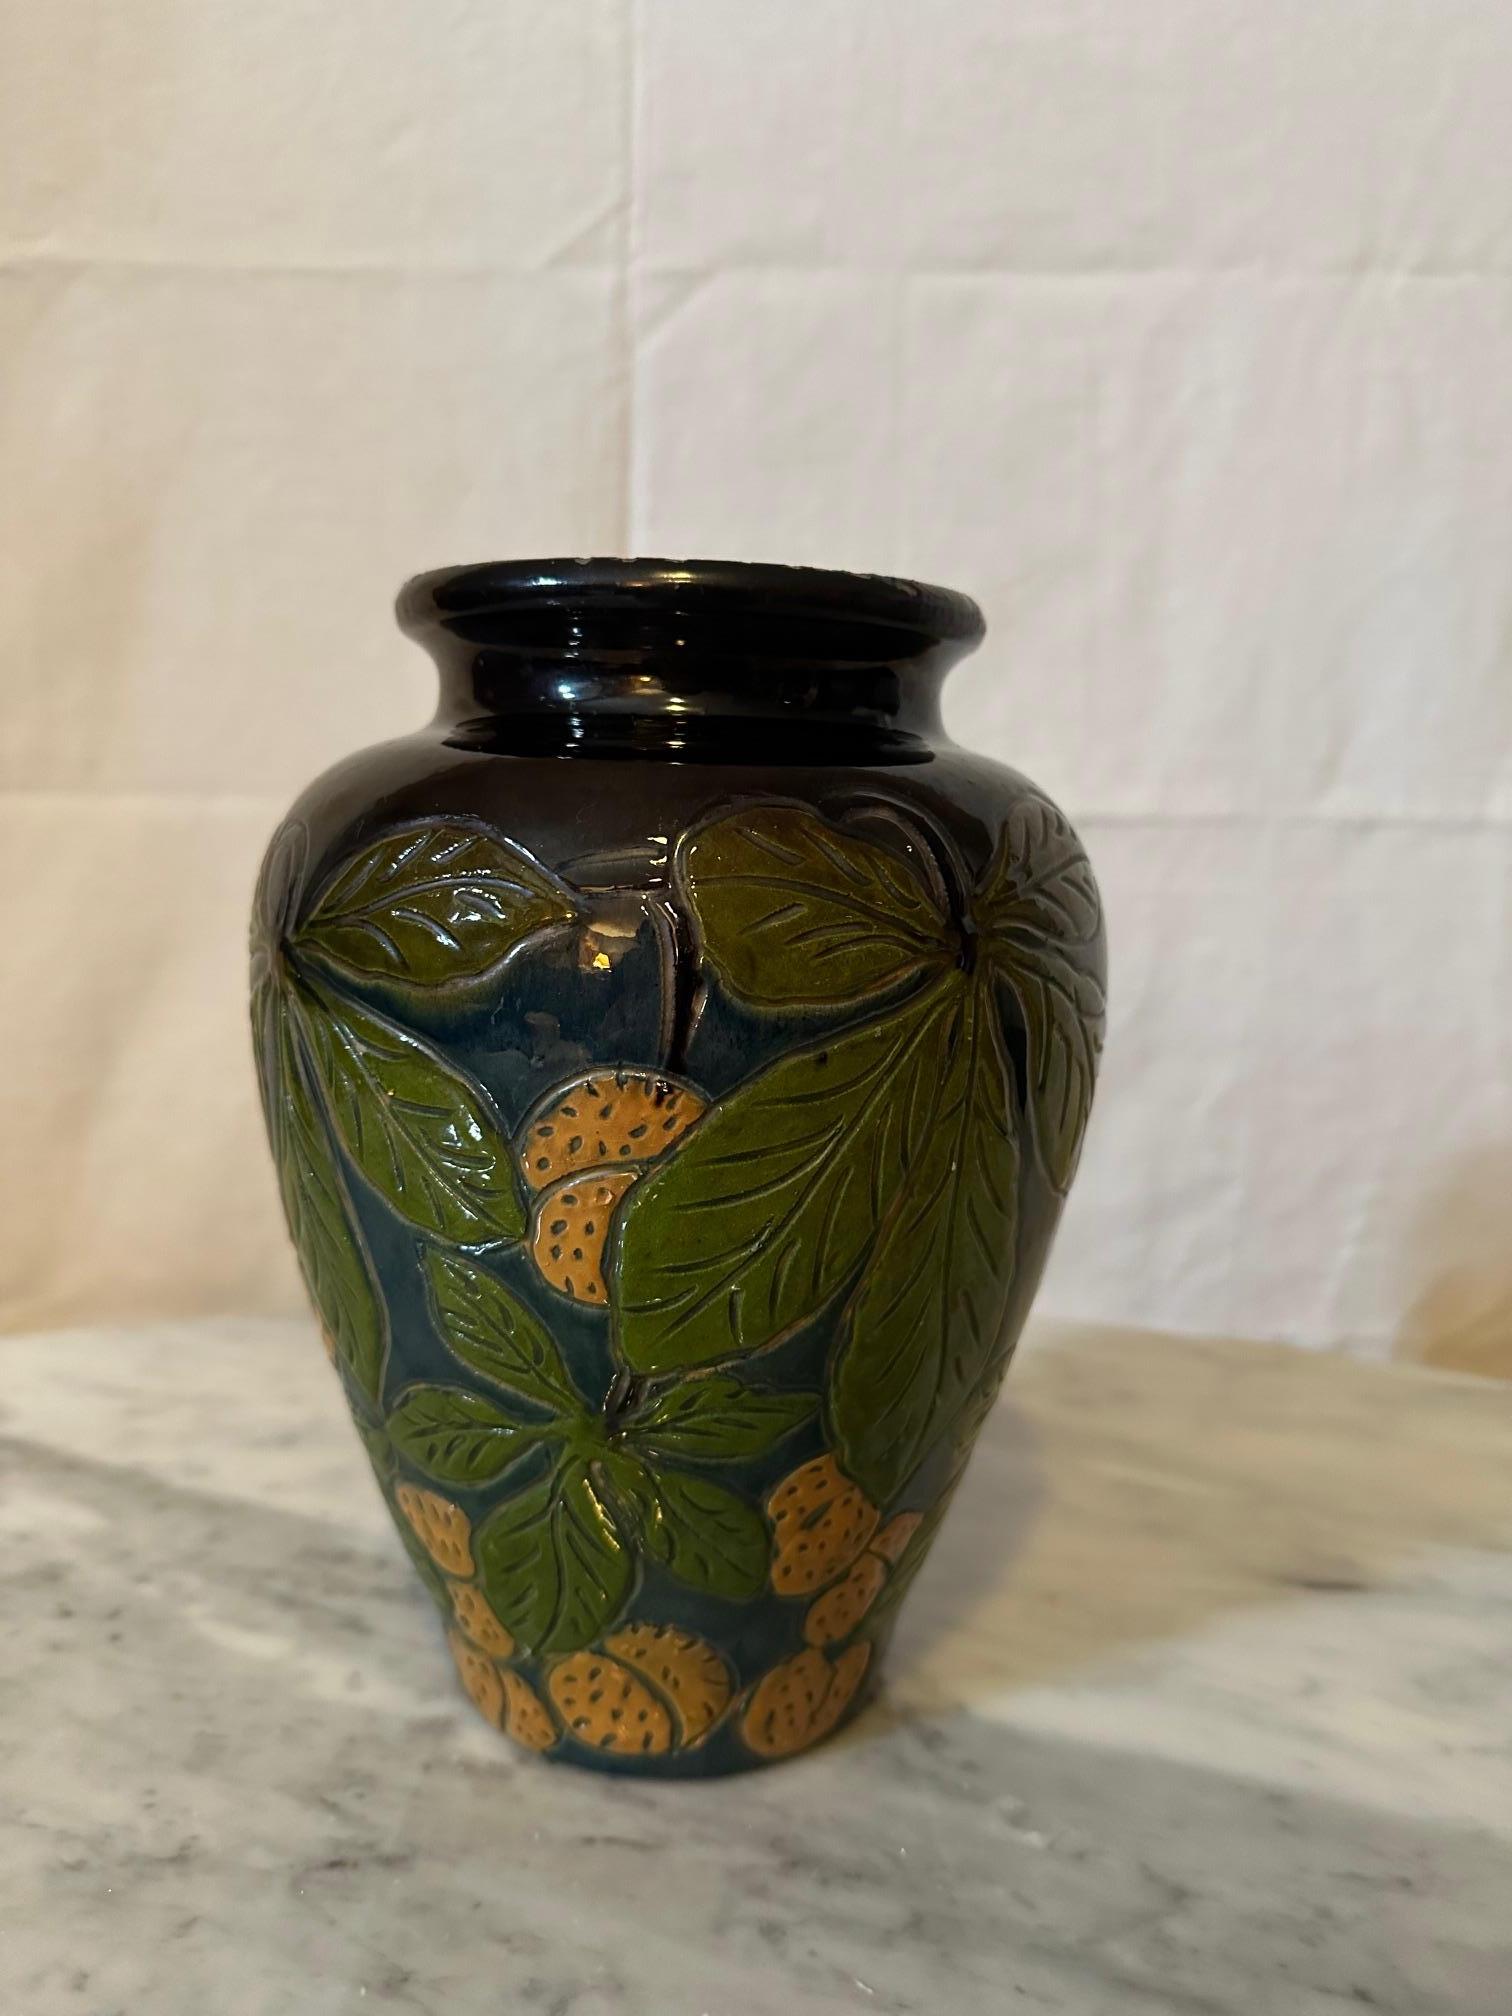 Beautiful glazed terracotta vase dating from the 1940s in good condition (Slight chips on the neck of the vase).
Comes from Savoie, Fauquet in Bonneville France. 
Walnut decoration on a blue background.